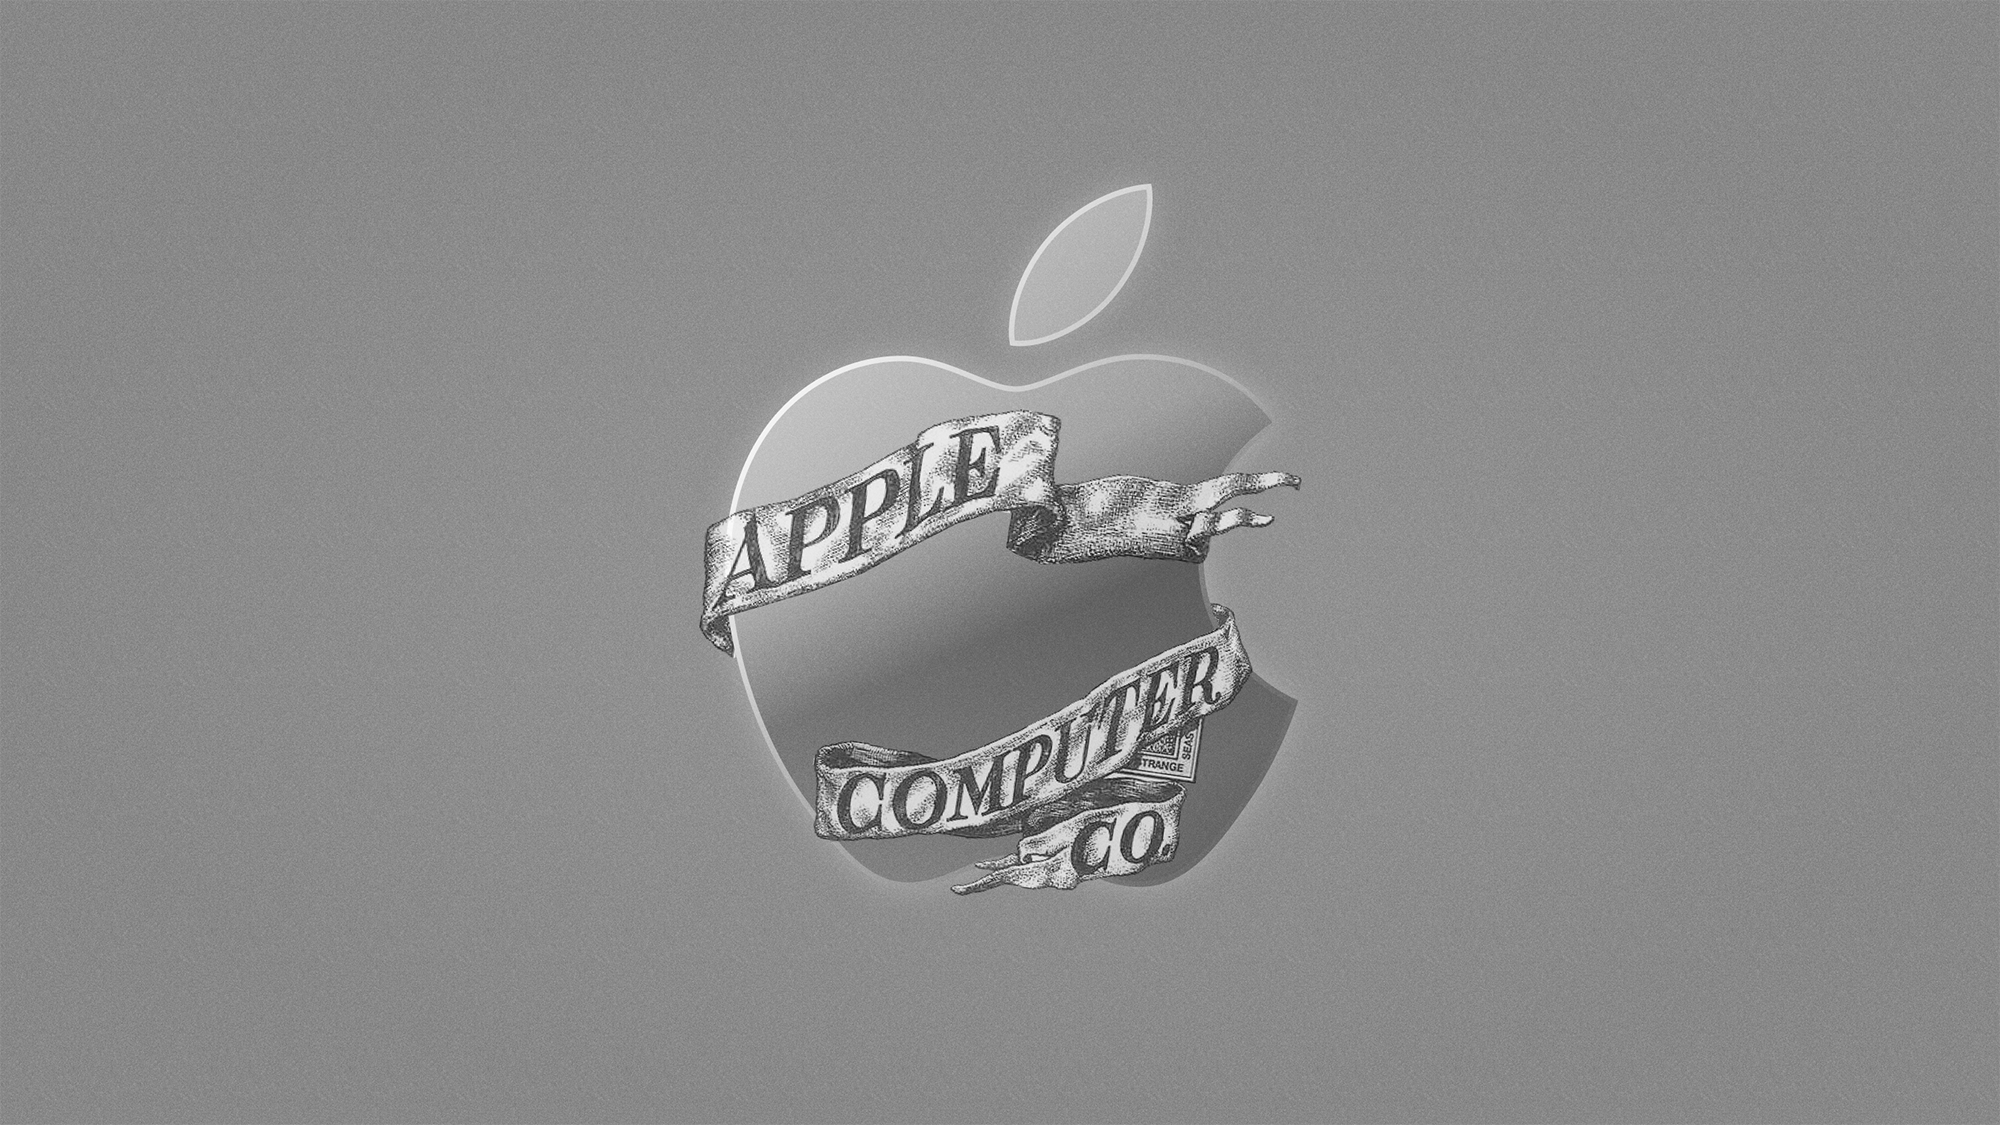 Apple logo merge – the first logo combined with latest